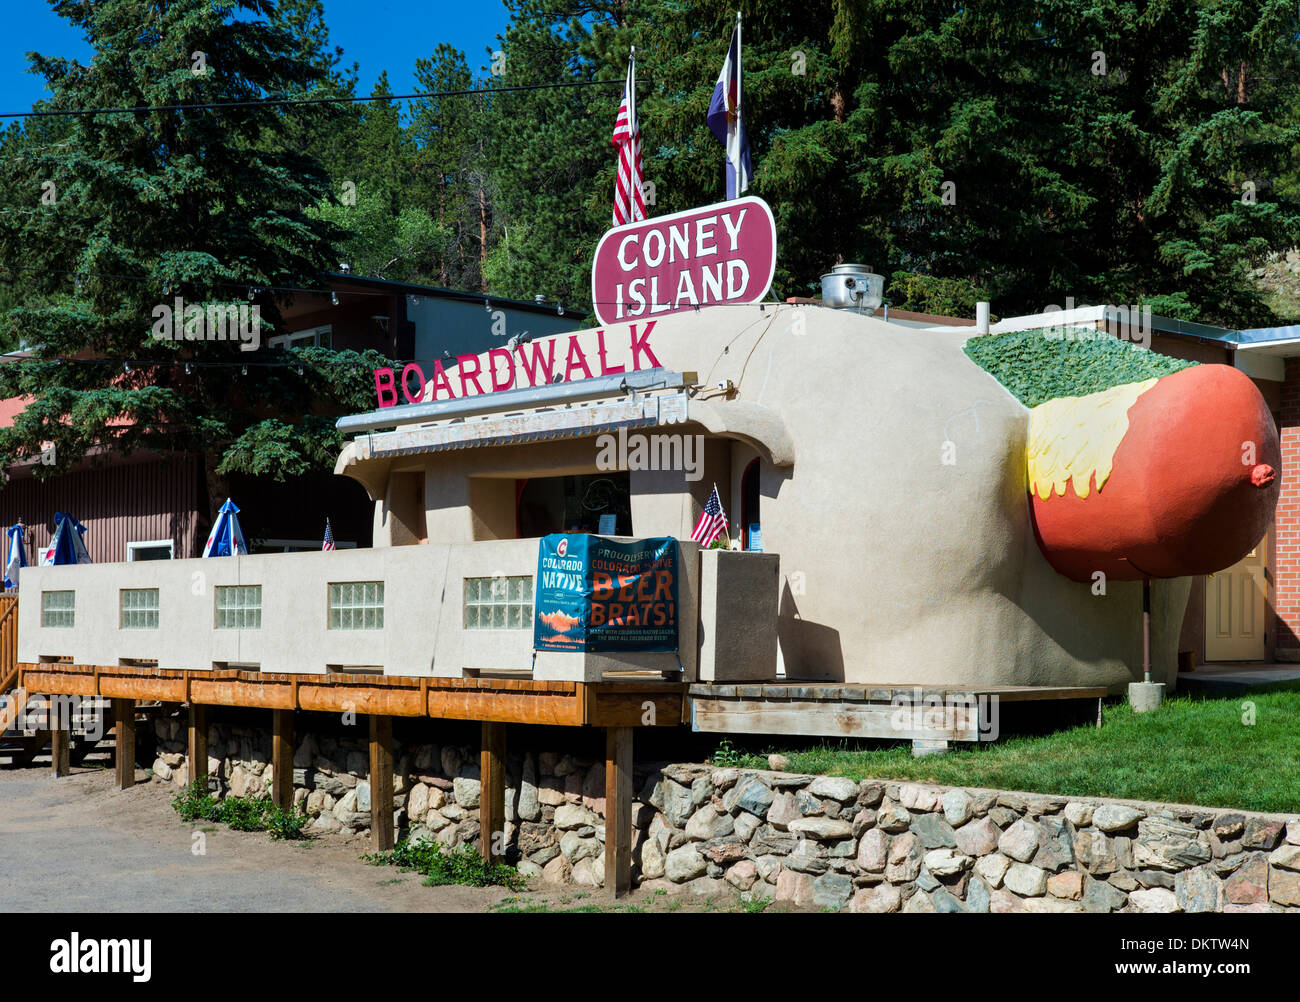 Coney Island Colorado in Bailey, Colorado is a 1950s diner shaped like a giant hot dog, with toppings. Stock Photo